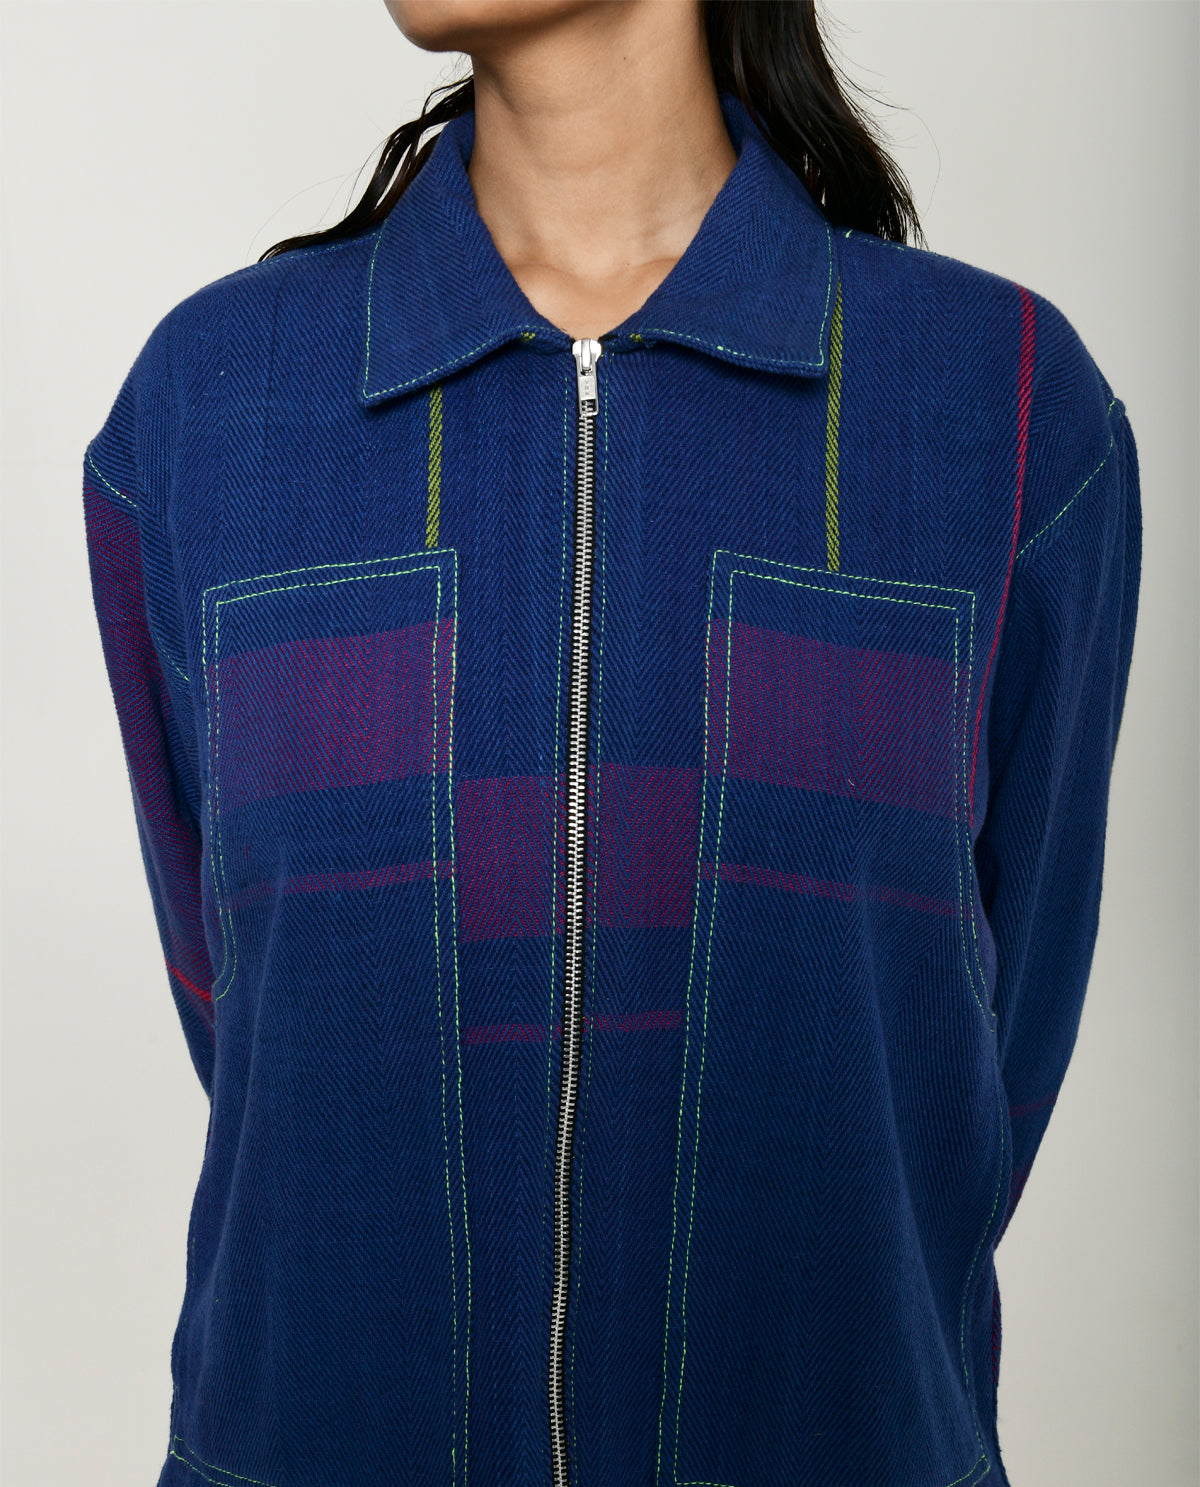 Handwoven Blue striped Cotton Shacket by Rias Jaipur with 100% Cotton, Blue, Casual wear, Multicolor, Natural, RE 2.O, RE 2.O by Rias Jaipur, Relaxed, Stripes, Tops, Unisex, Womenswear at Kamakhyaa for sustainable fashion